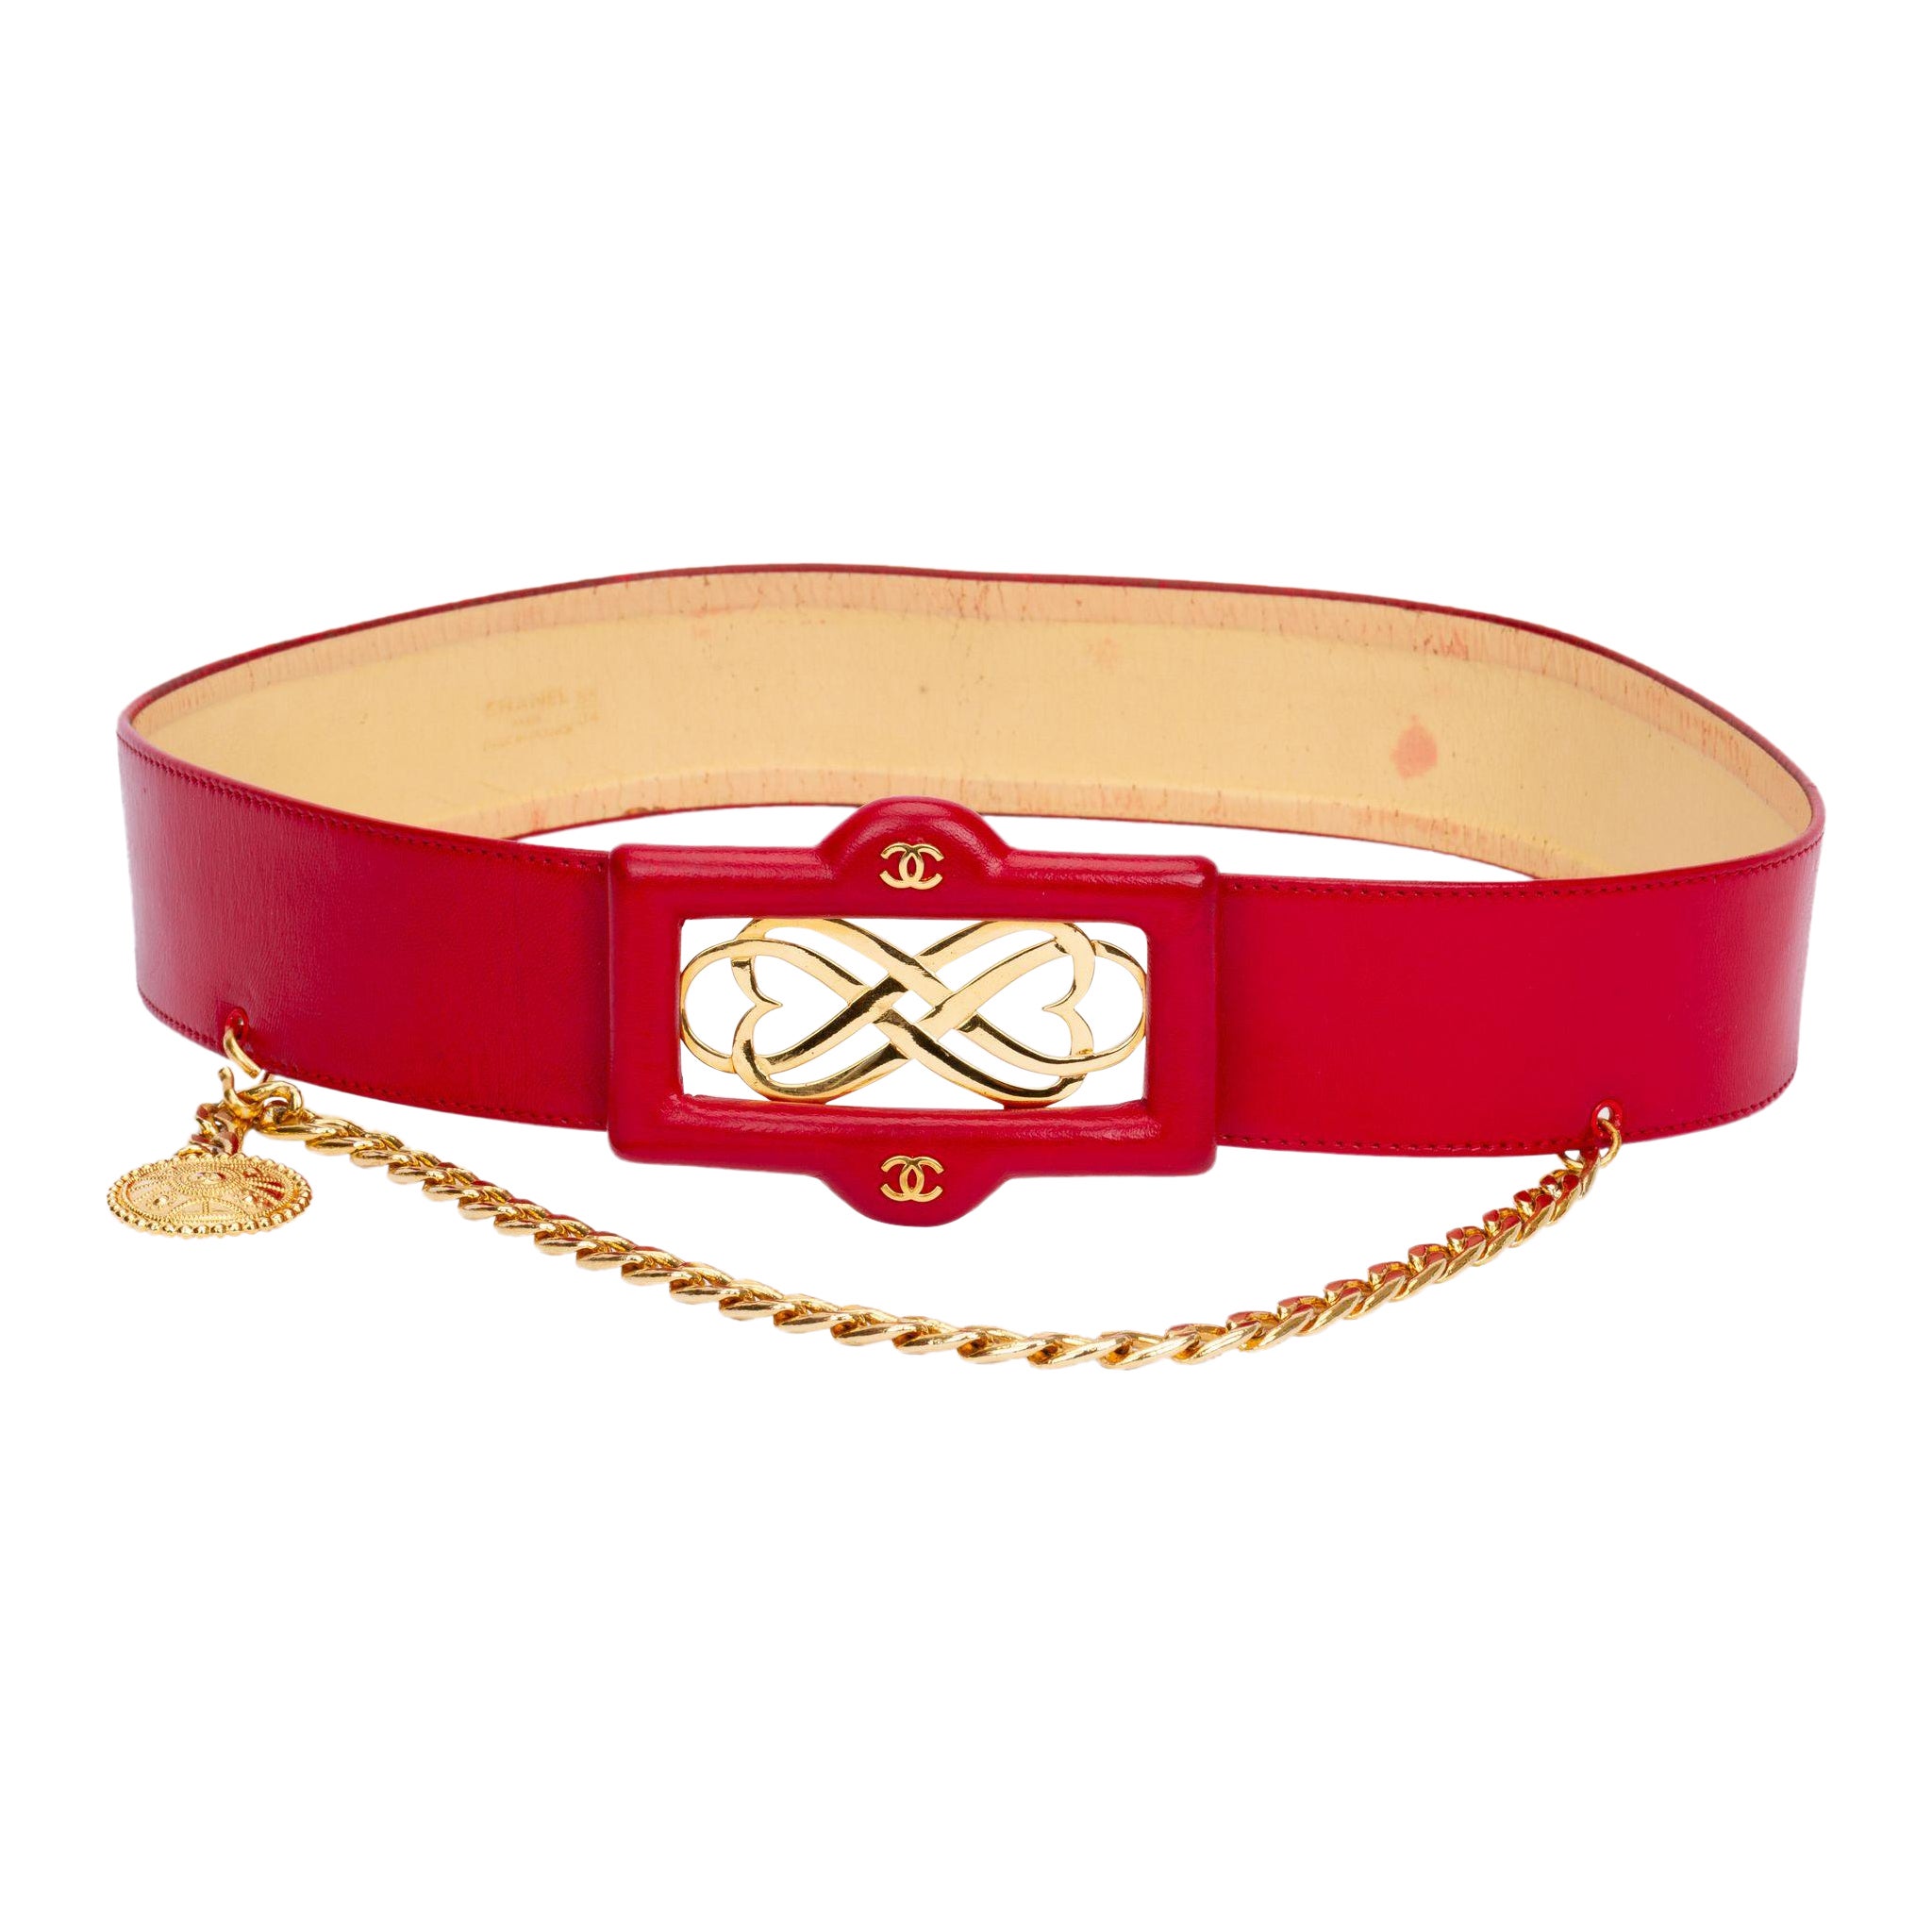 Chanel Red 80s Belt With Chain Drop For Sale